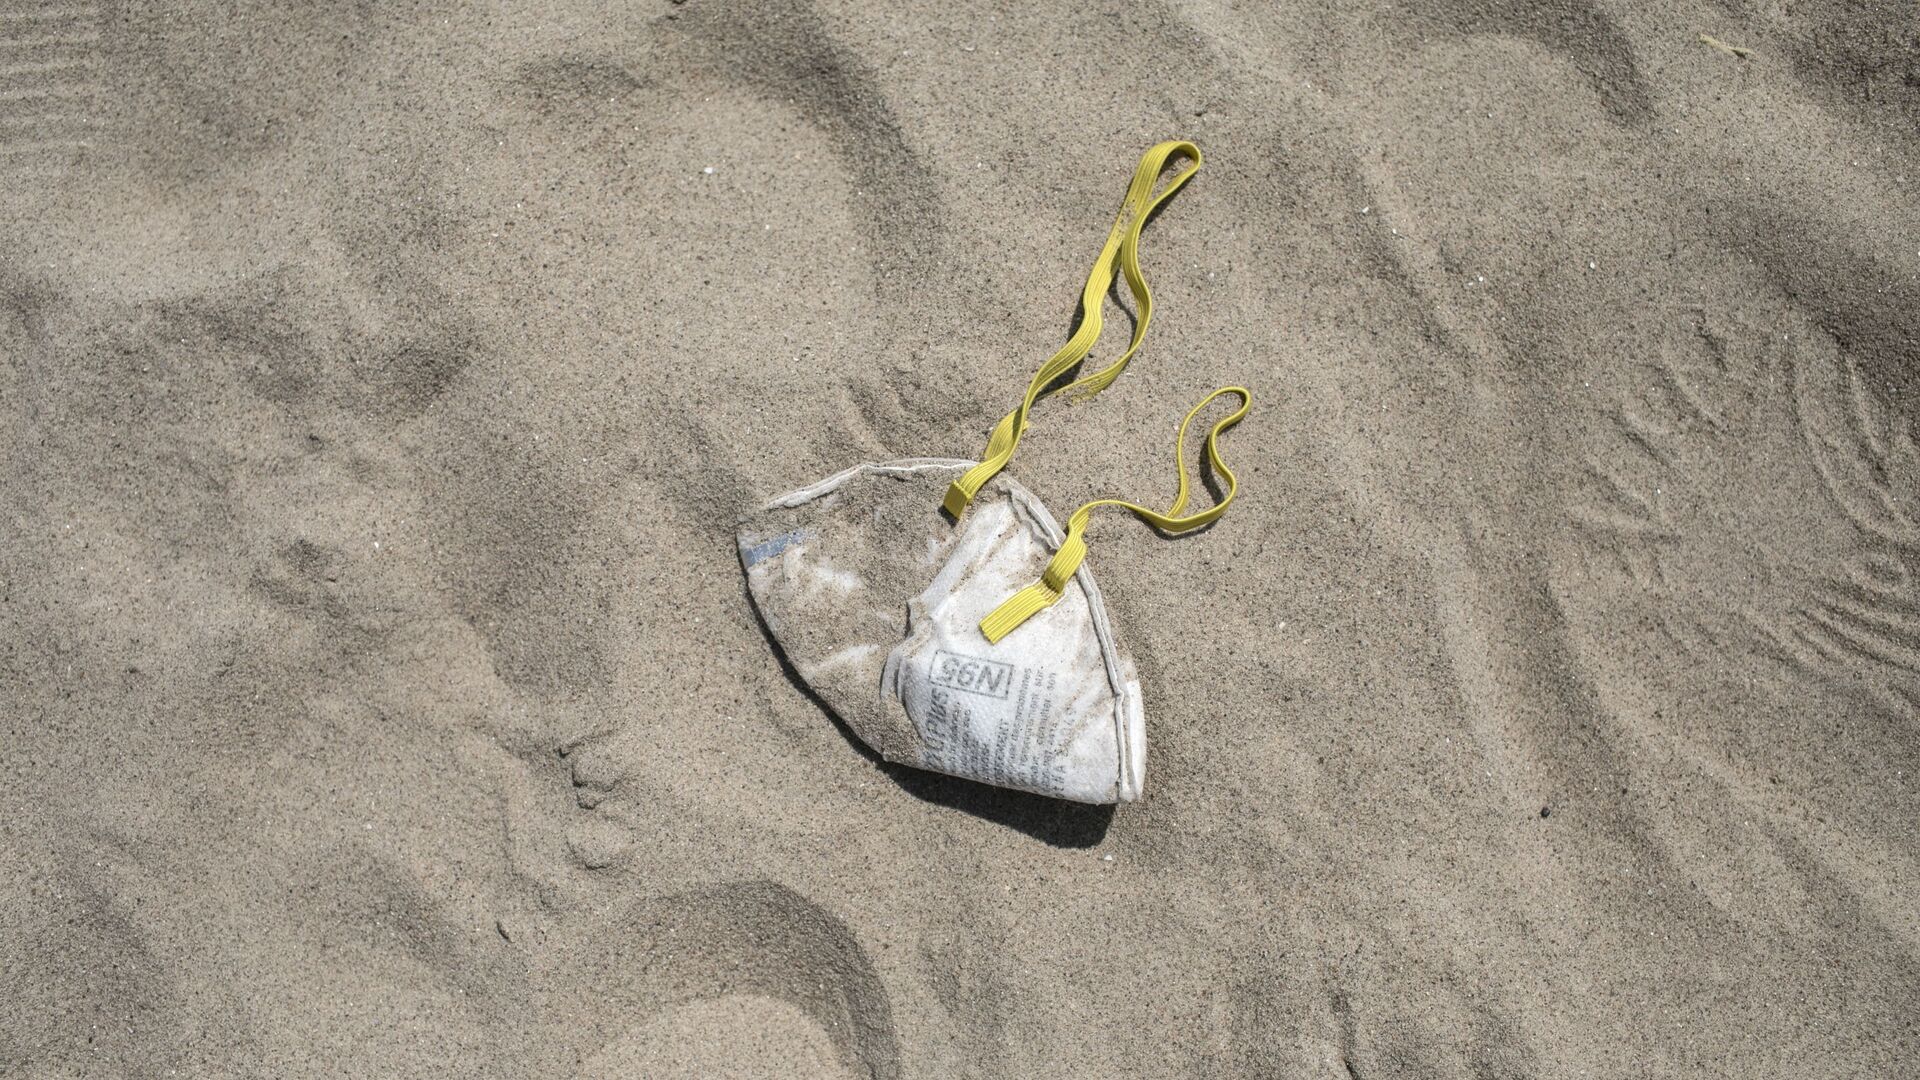 An N95 protective face mask lies in the sand on Brighton Beach in the Brooklyn borough of New York, Saturday, April 25, 2020. With the weather warming up, more people wearing personal protective equipment are venturing out to the parks and streets, though most are still respecting the social distancing guidelines for the COVID-19 coronavirus. - Sputnik International, 1920, 19.01.2022